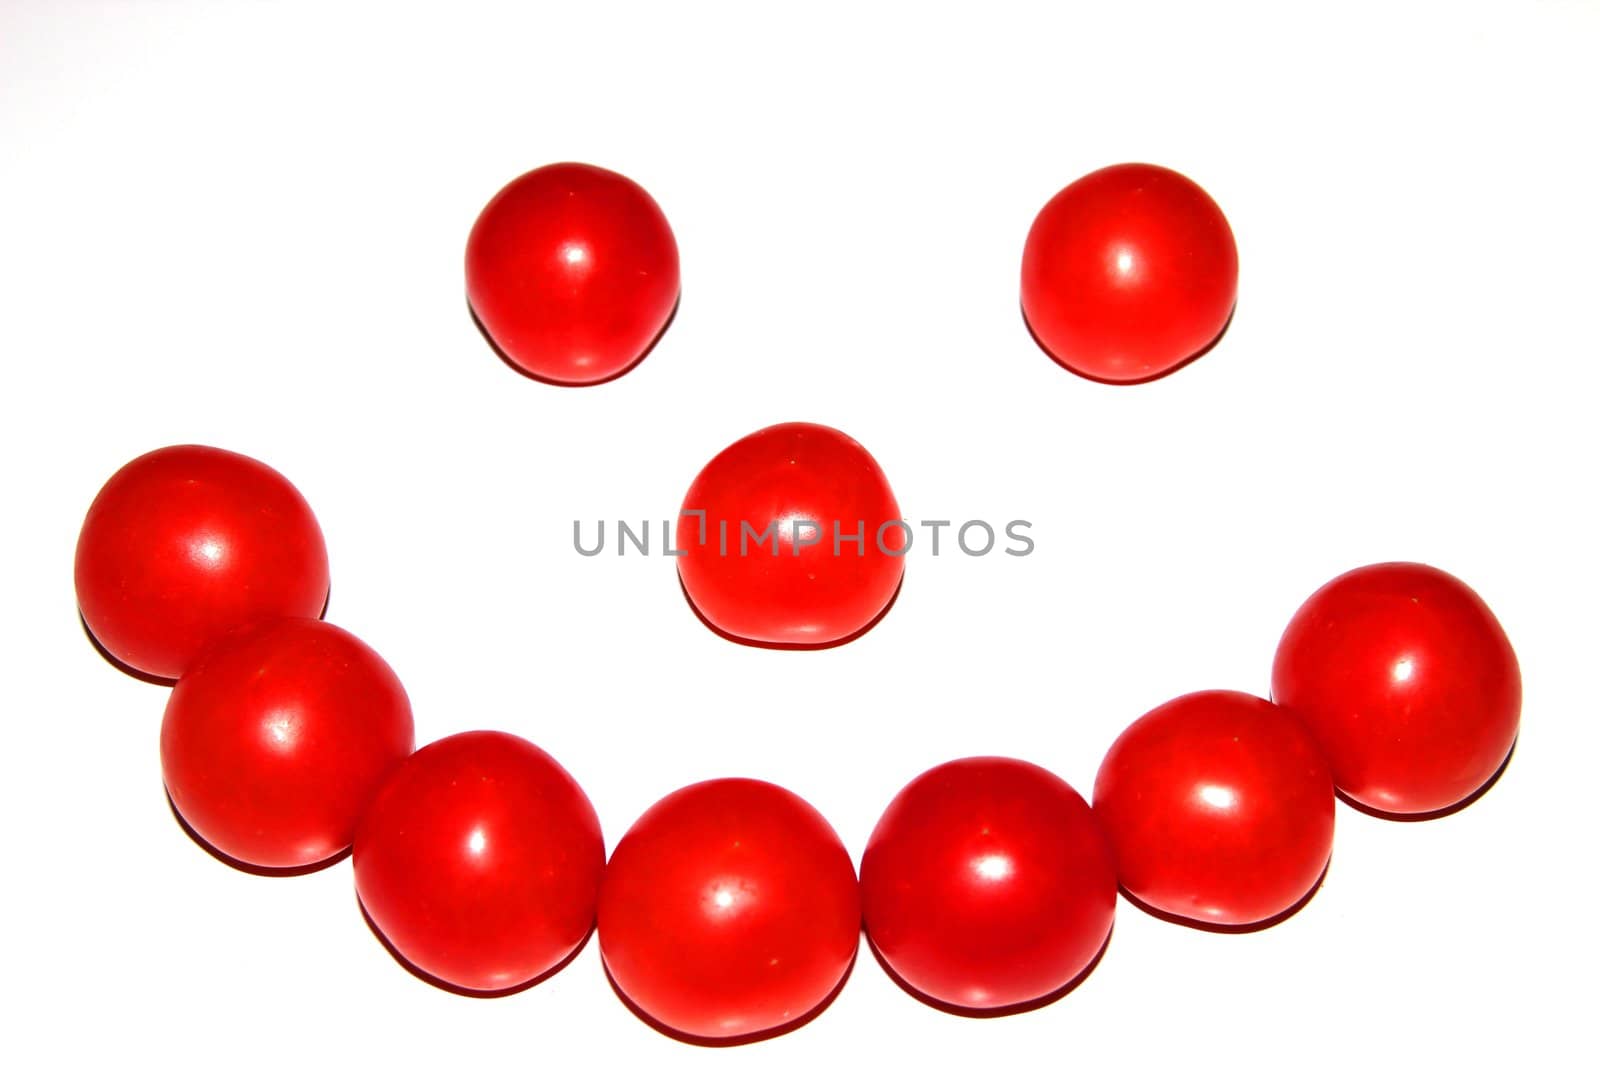 Smiling ugly face from little tomatoes isolated on white background